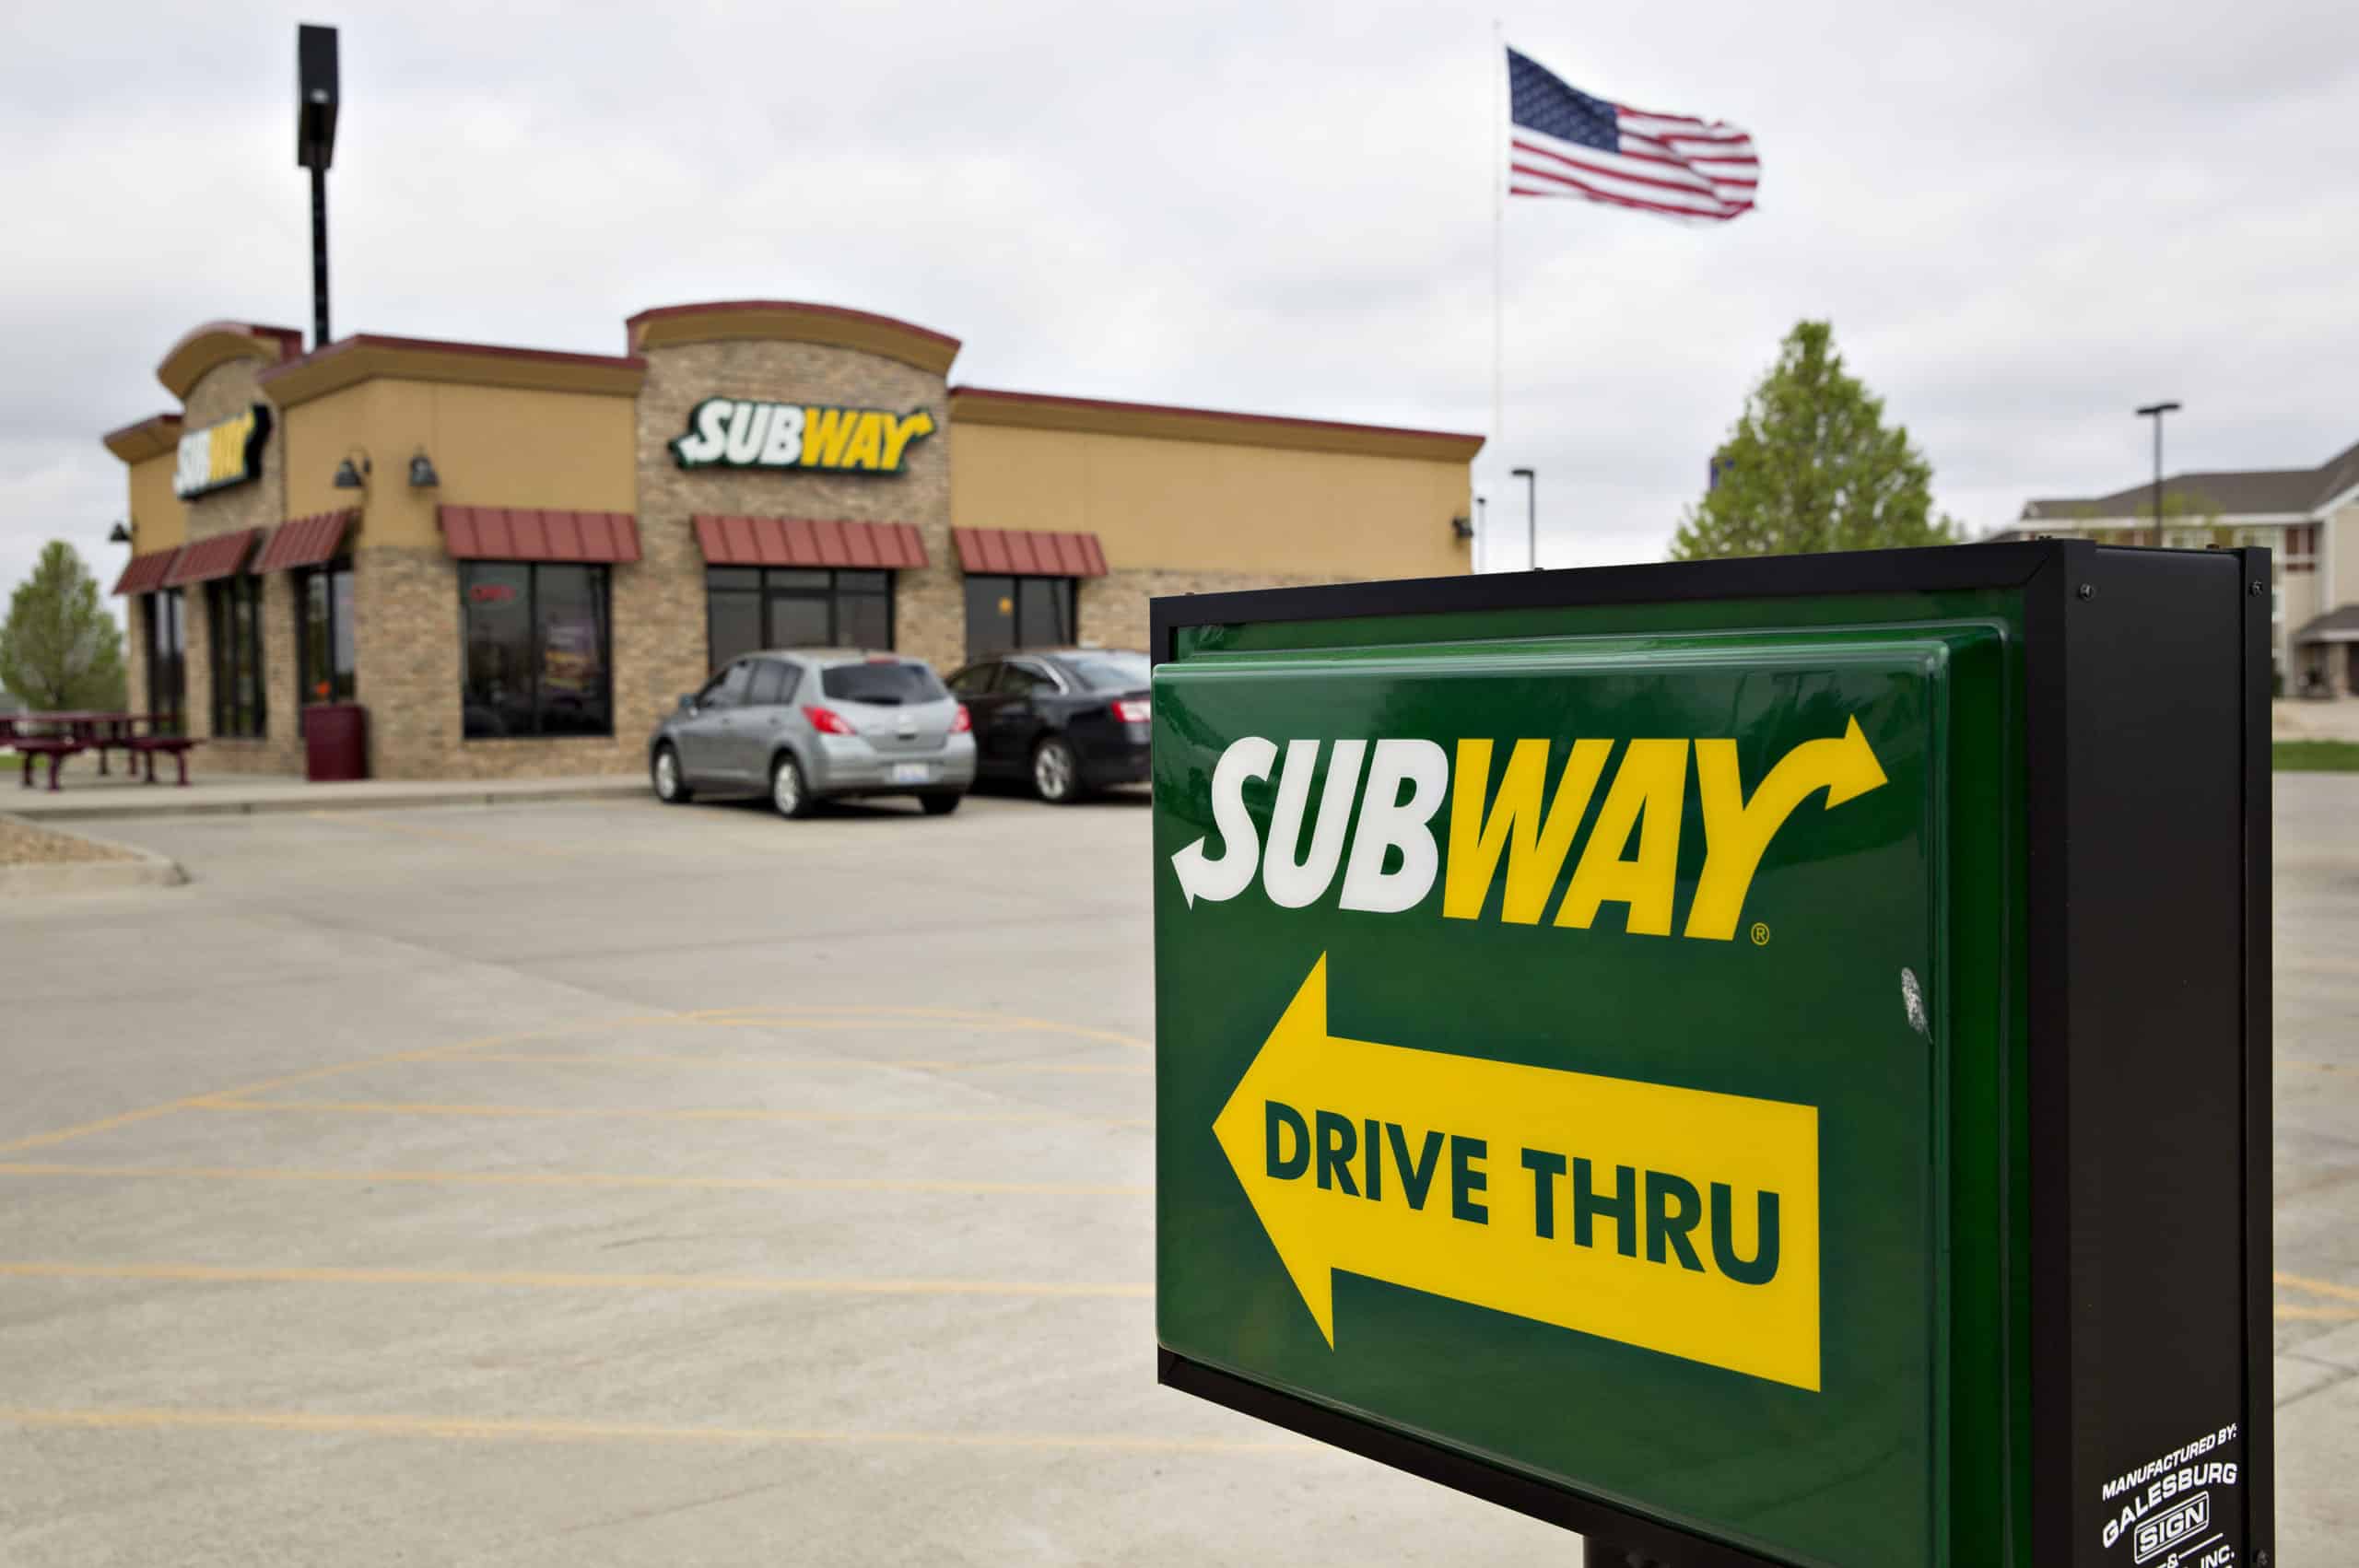 Lab Analysis Determines Tuna Could Not Be Found In Subway’s Tuna Sandwiches